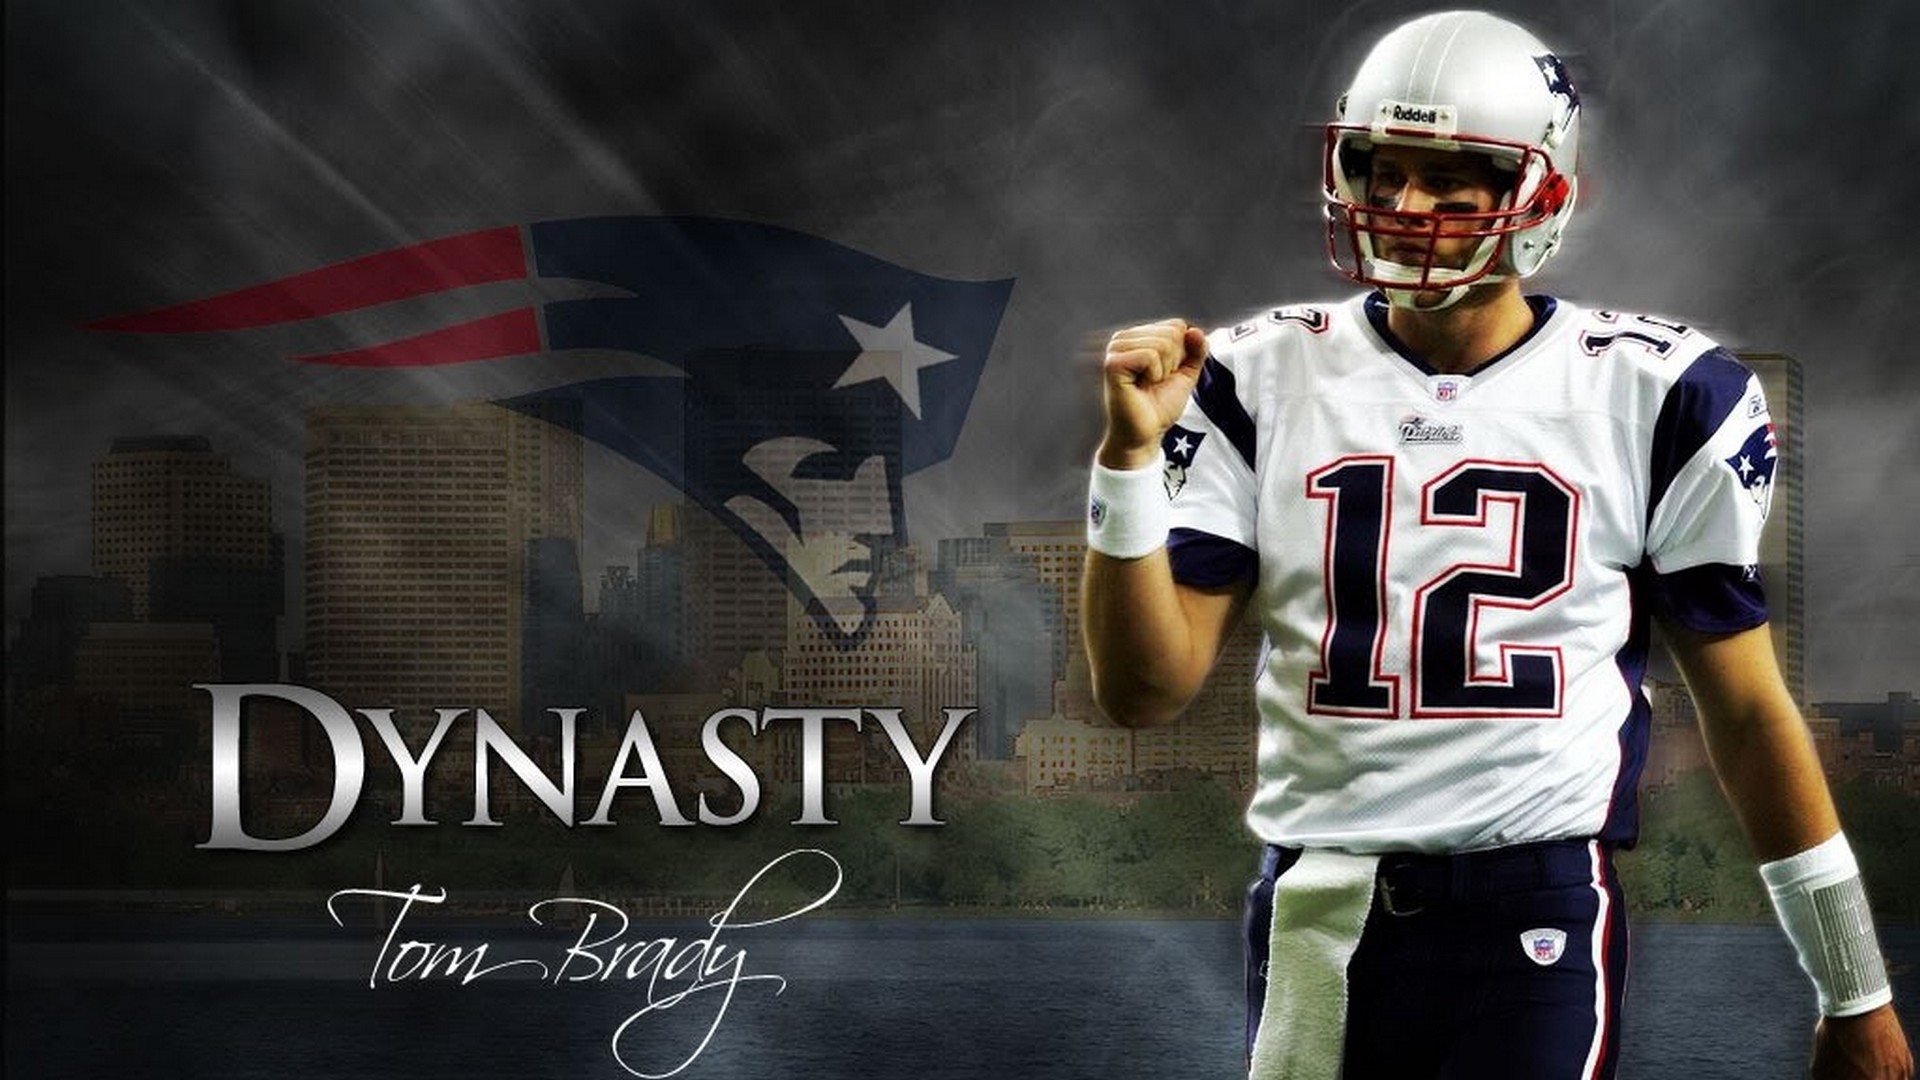 Wallpaper Tom Brady Goat with image resolution 1920x1080 pixel. You can use this wallpaper as background for your desktop Computer Screensavers, Android or iPhone smartphones